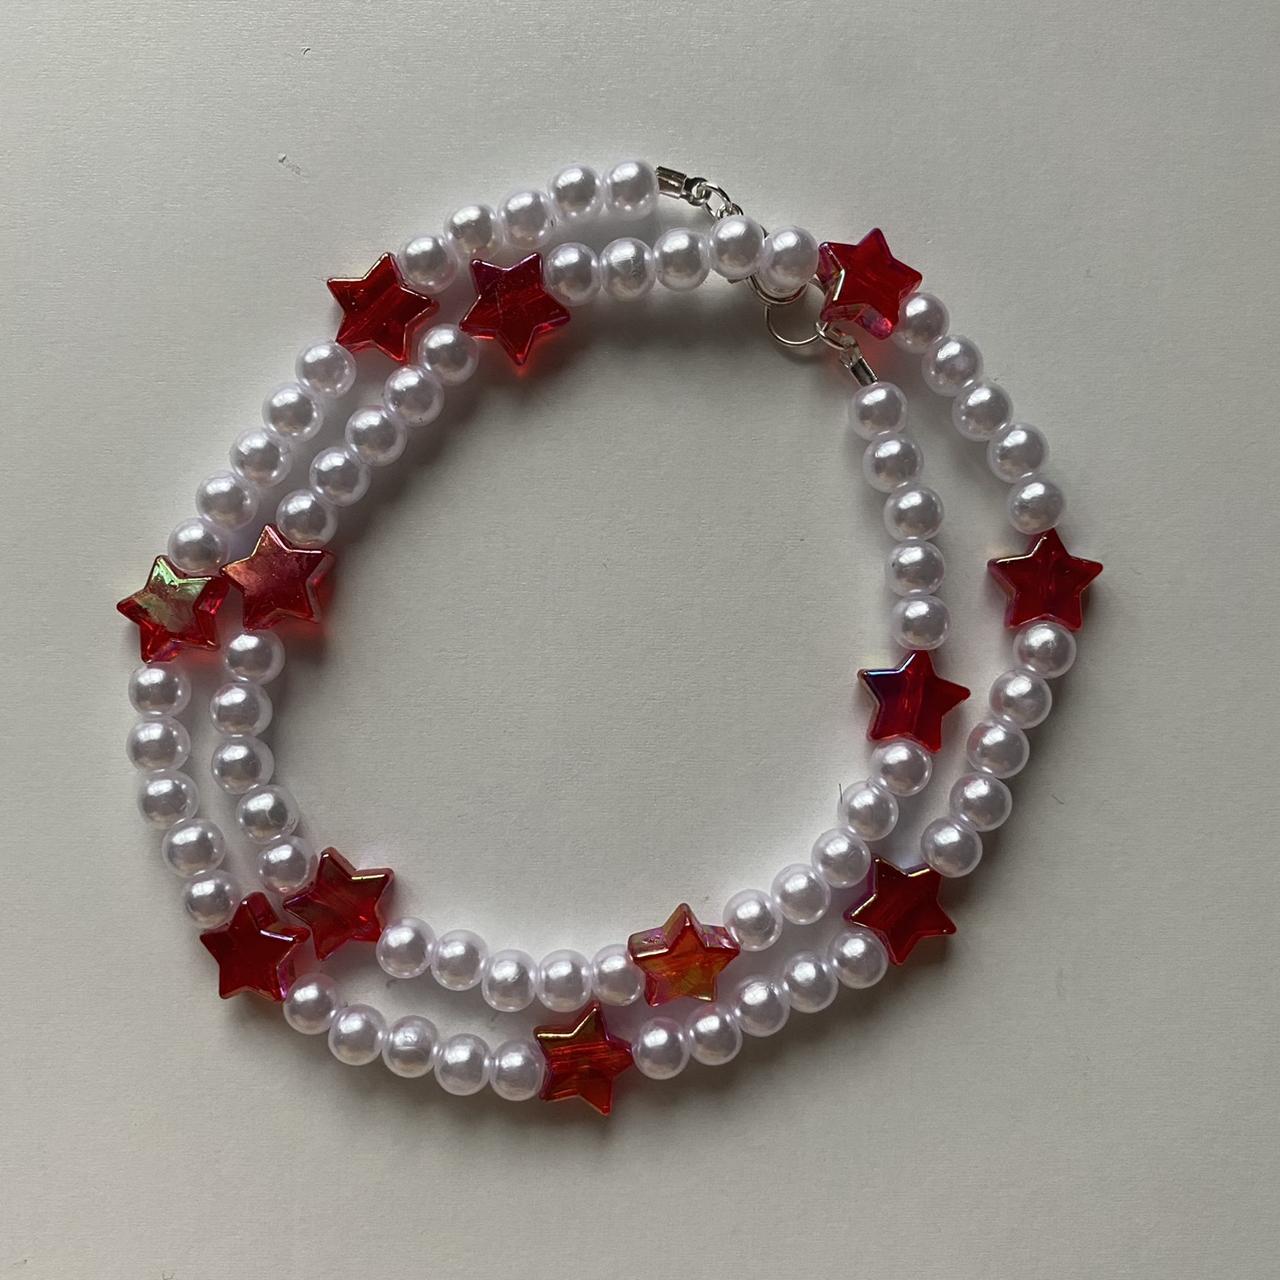 Women's White and Red Jewellery | Depop